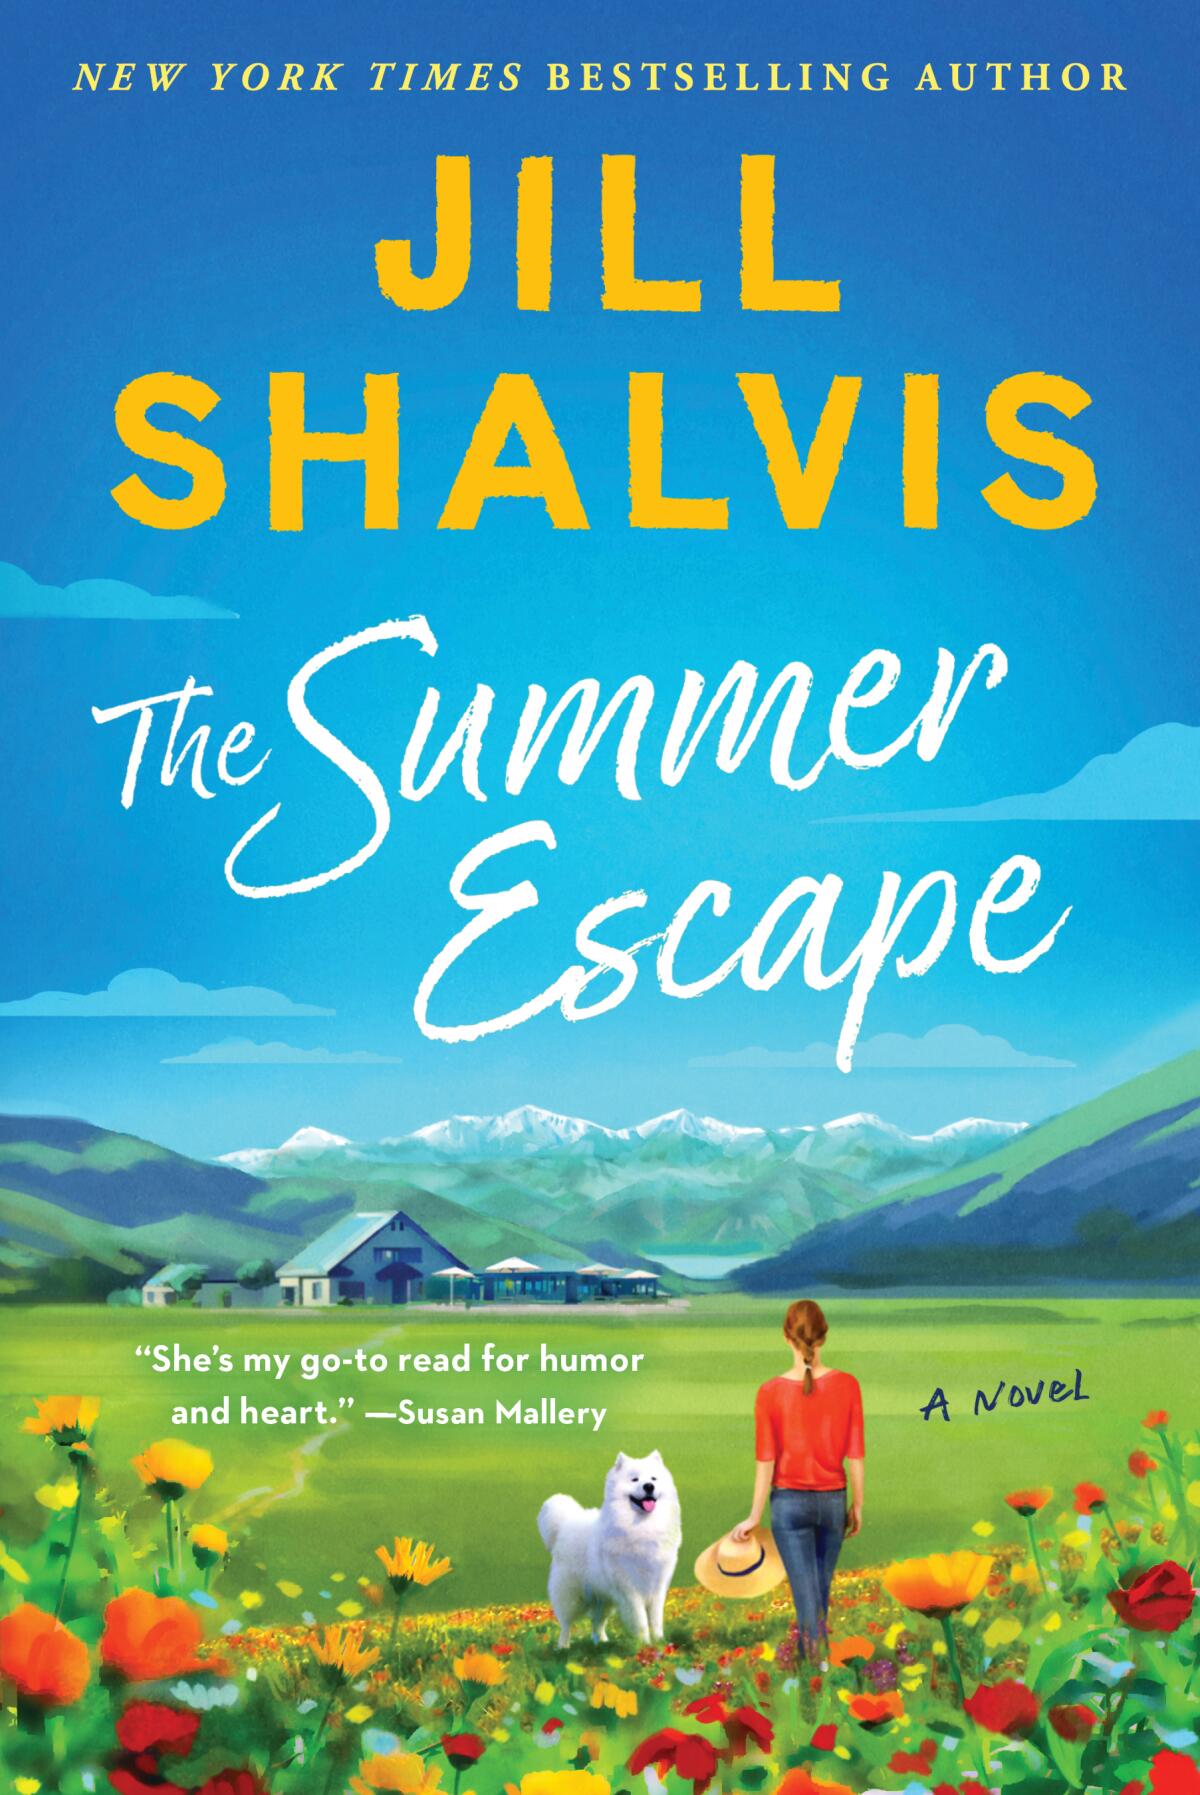 "The Summer Escape" by Jill Shalvis